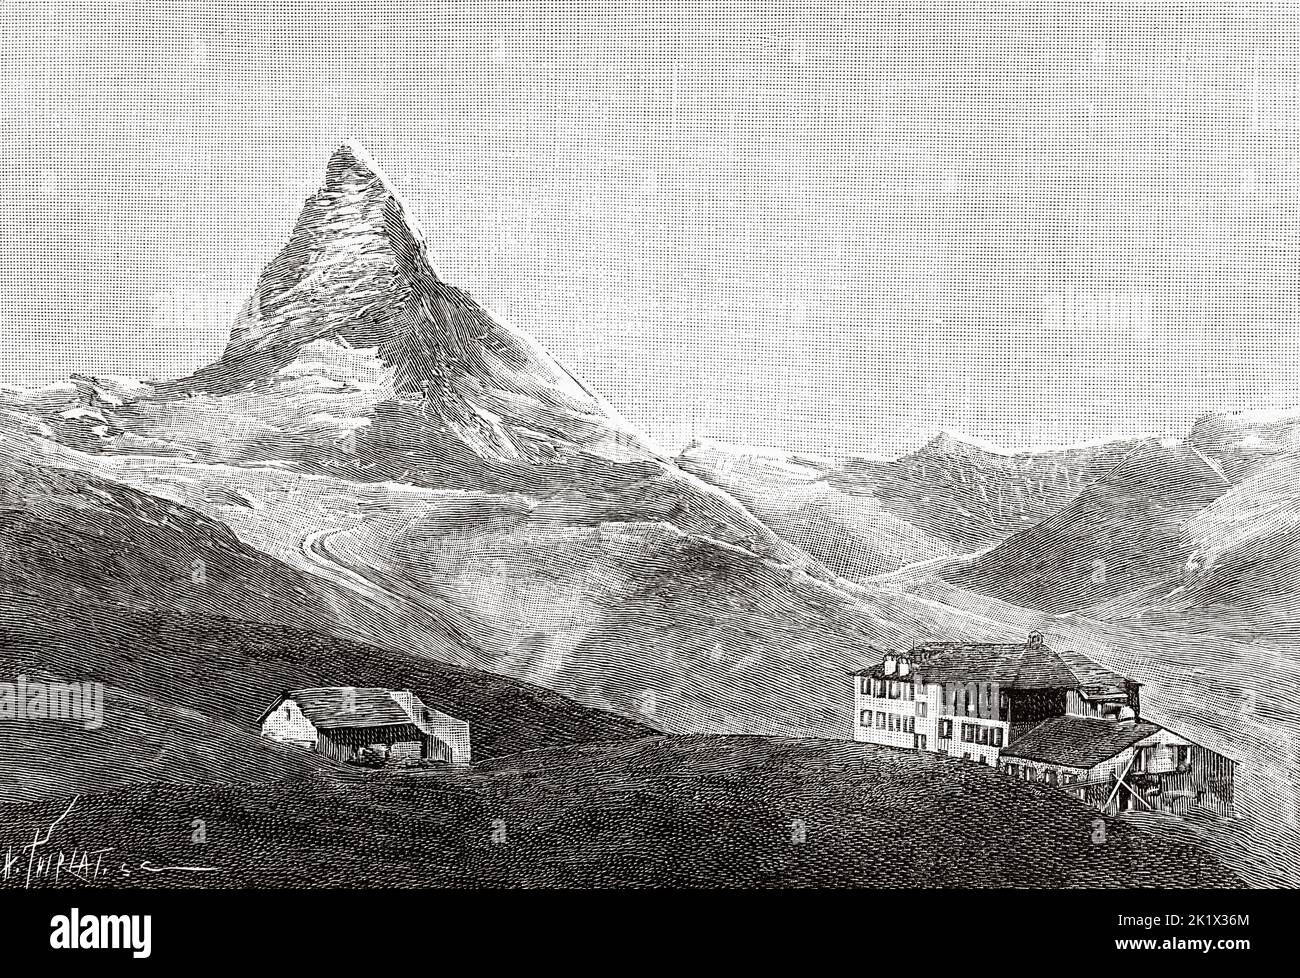 View of the Hotel du Riffle and the The Matterhorn. Cervino mountain of the Alps, straddling the main watershed and border between Switzerland and Italy. Old 19th century engraved illustration from La Nature 1890 Stock Photo